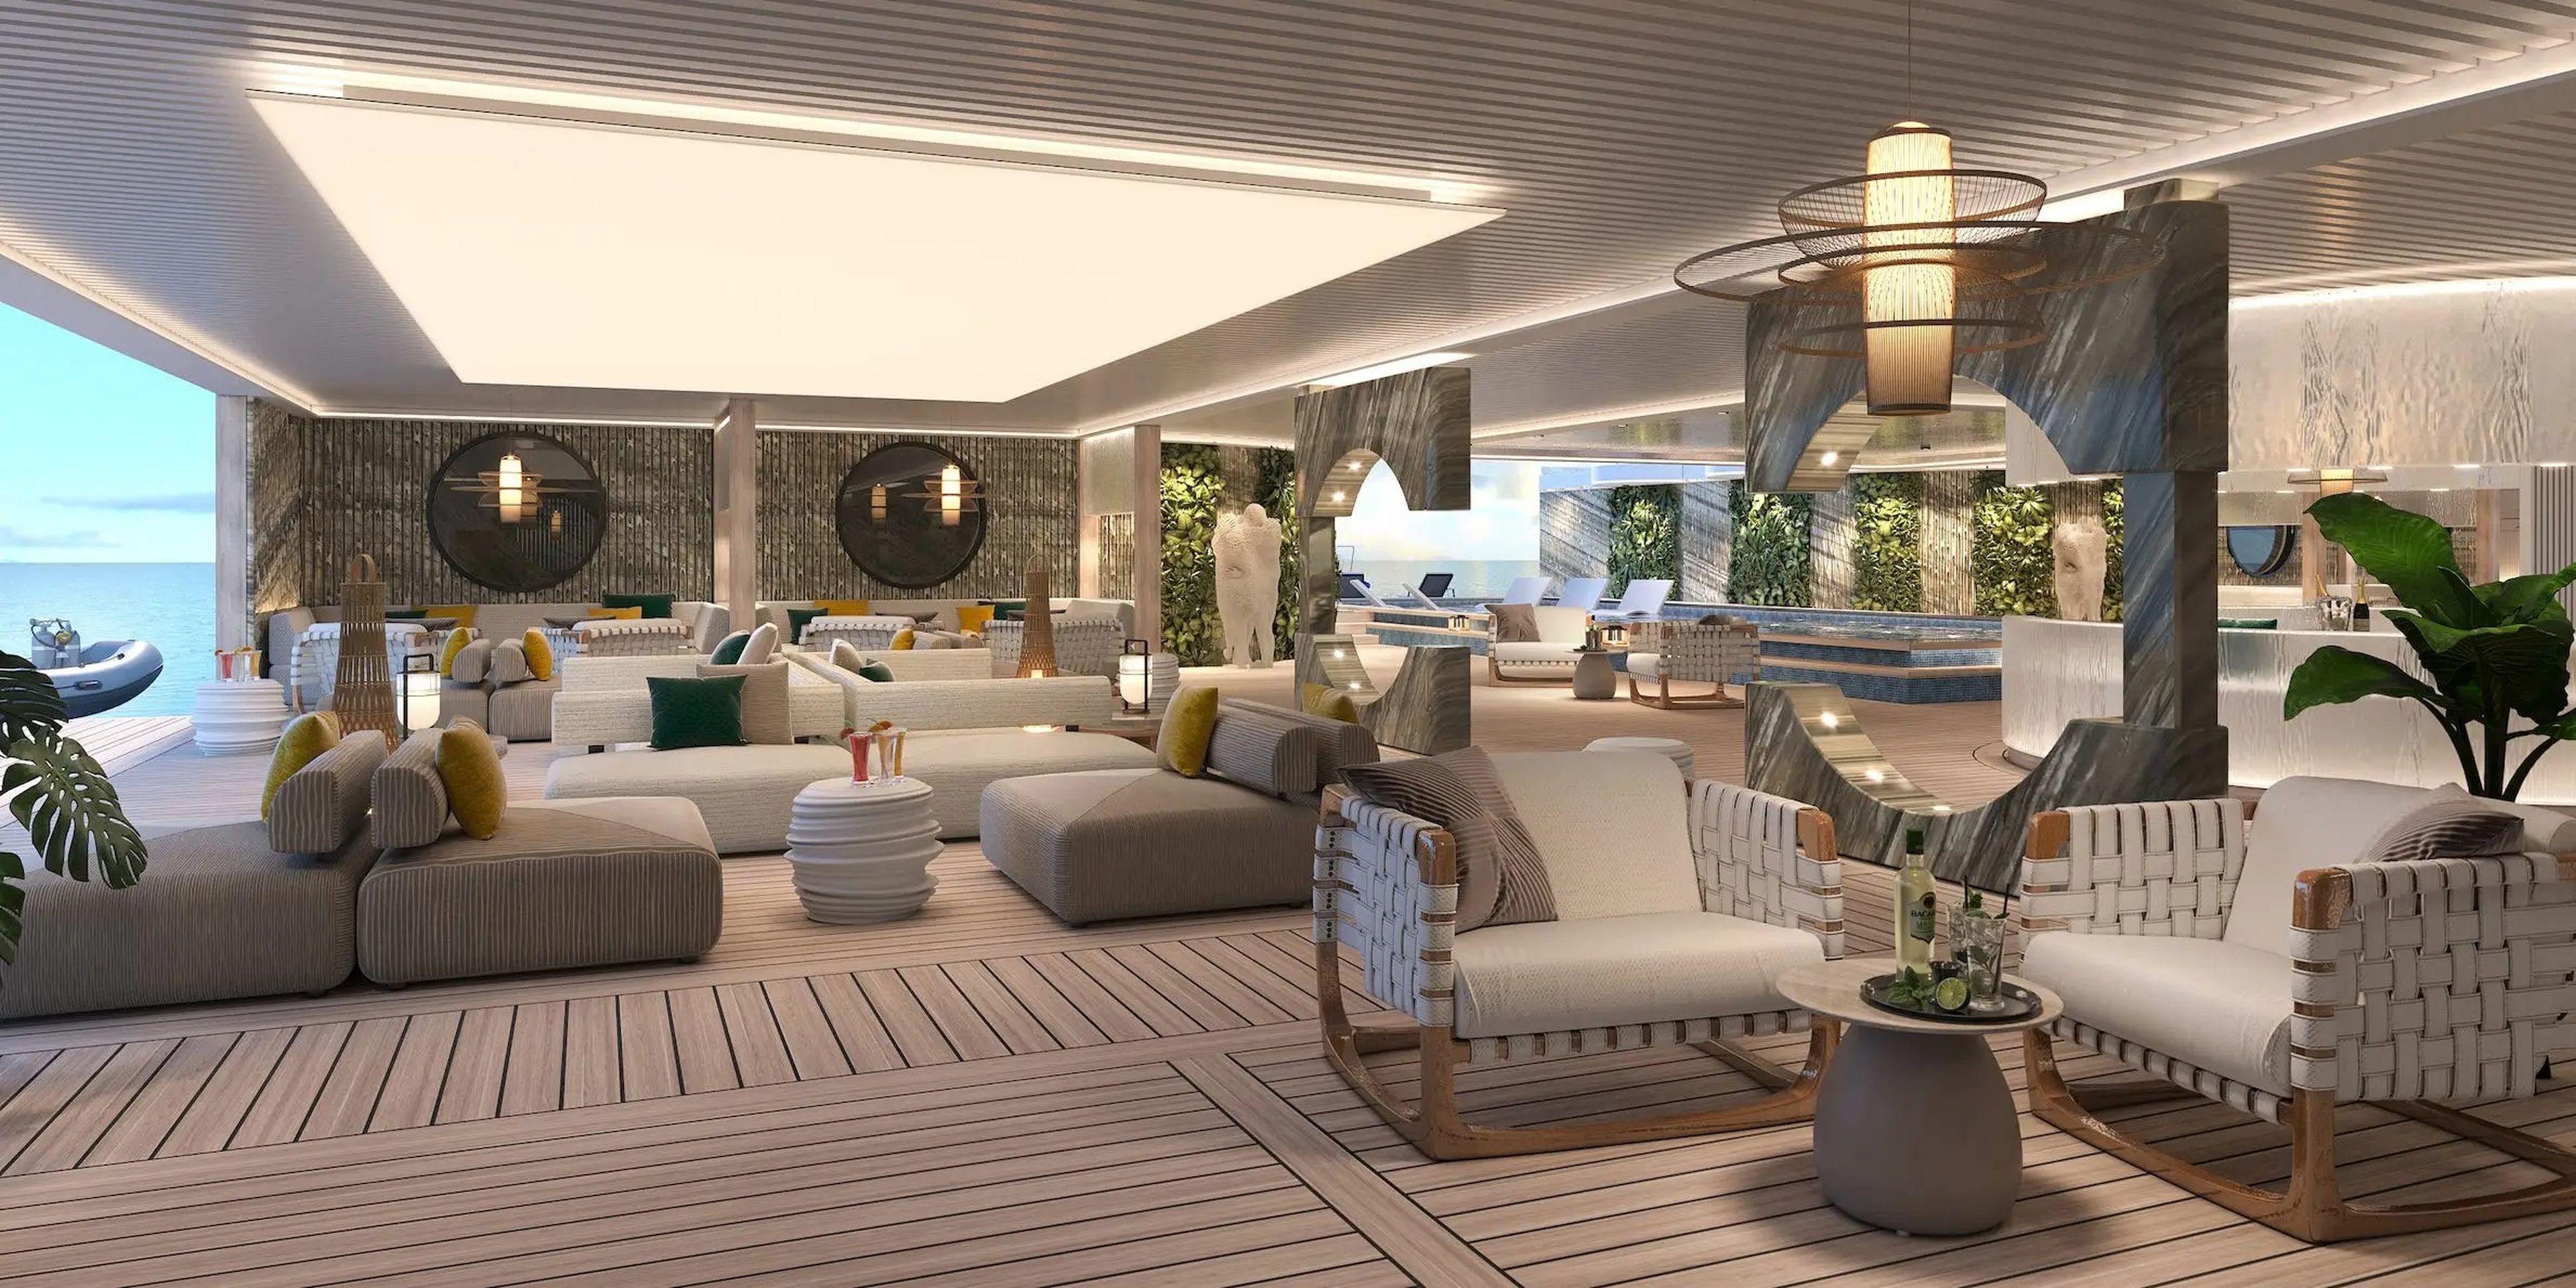 A rendering of the lounge in Storylines' MV Narrative cruise ship.